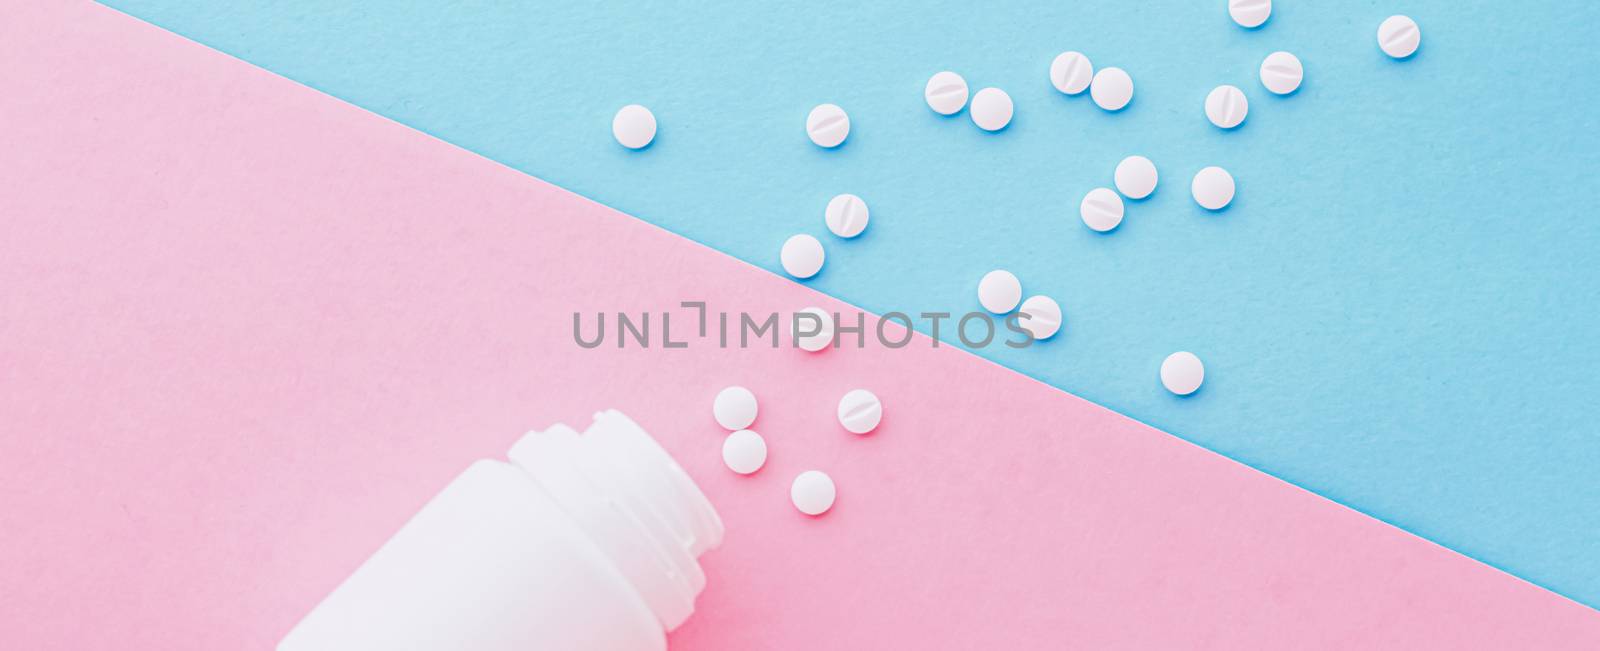 Medical pills and drugs, medicine for health care and therapy by Anneleven